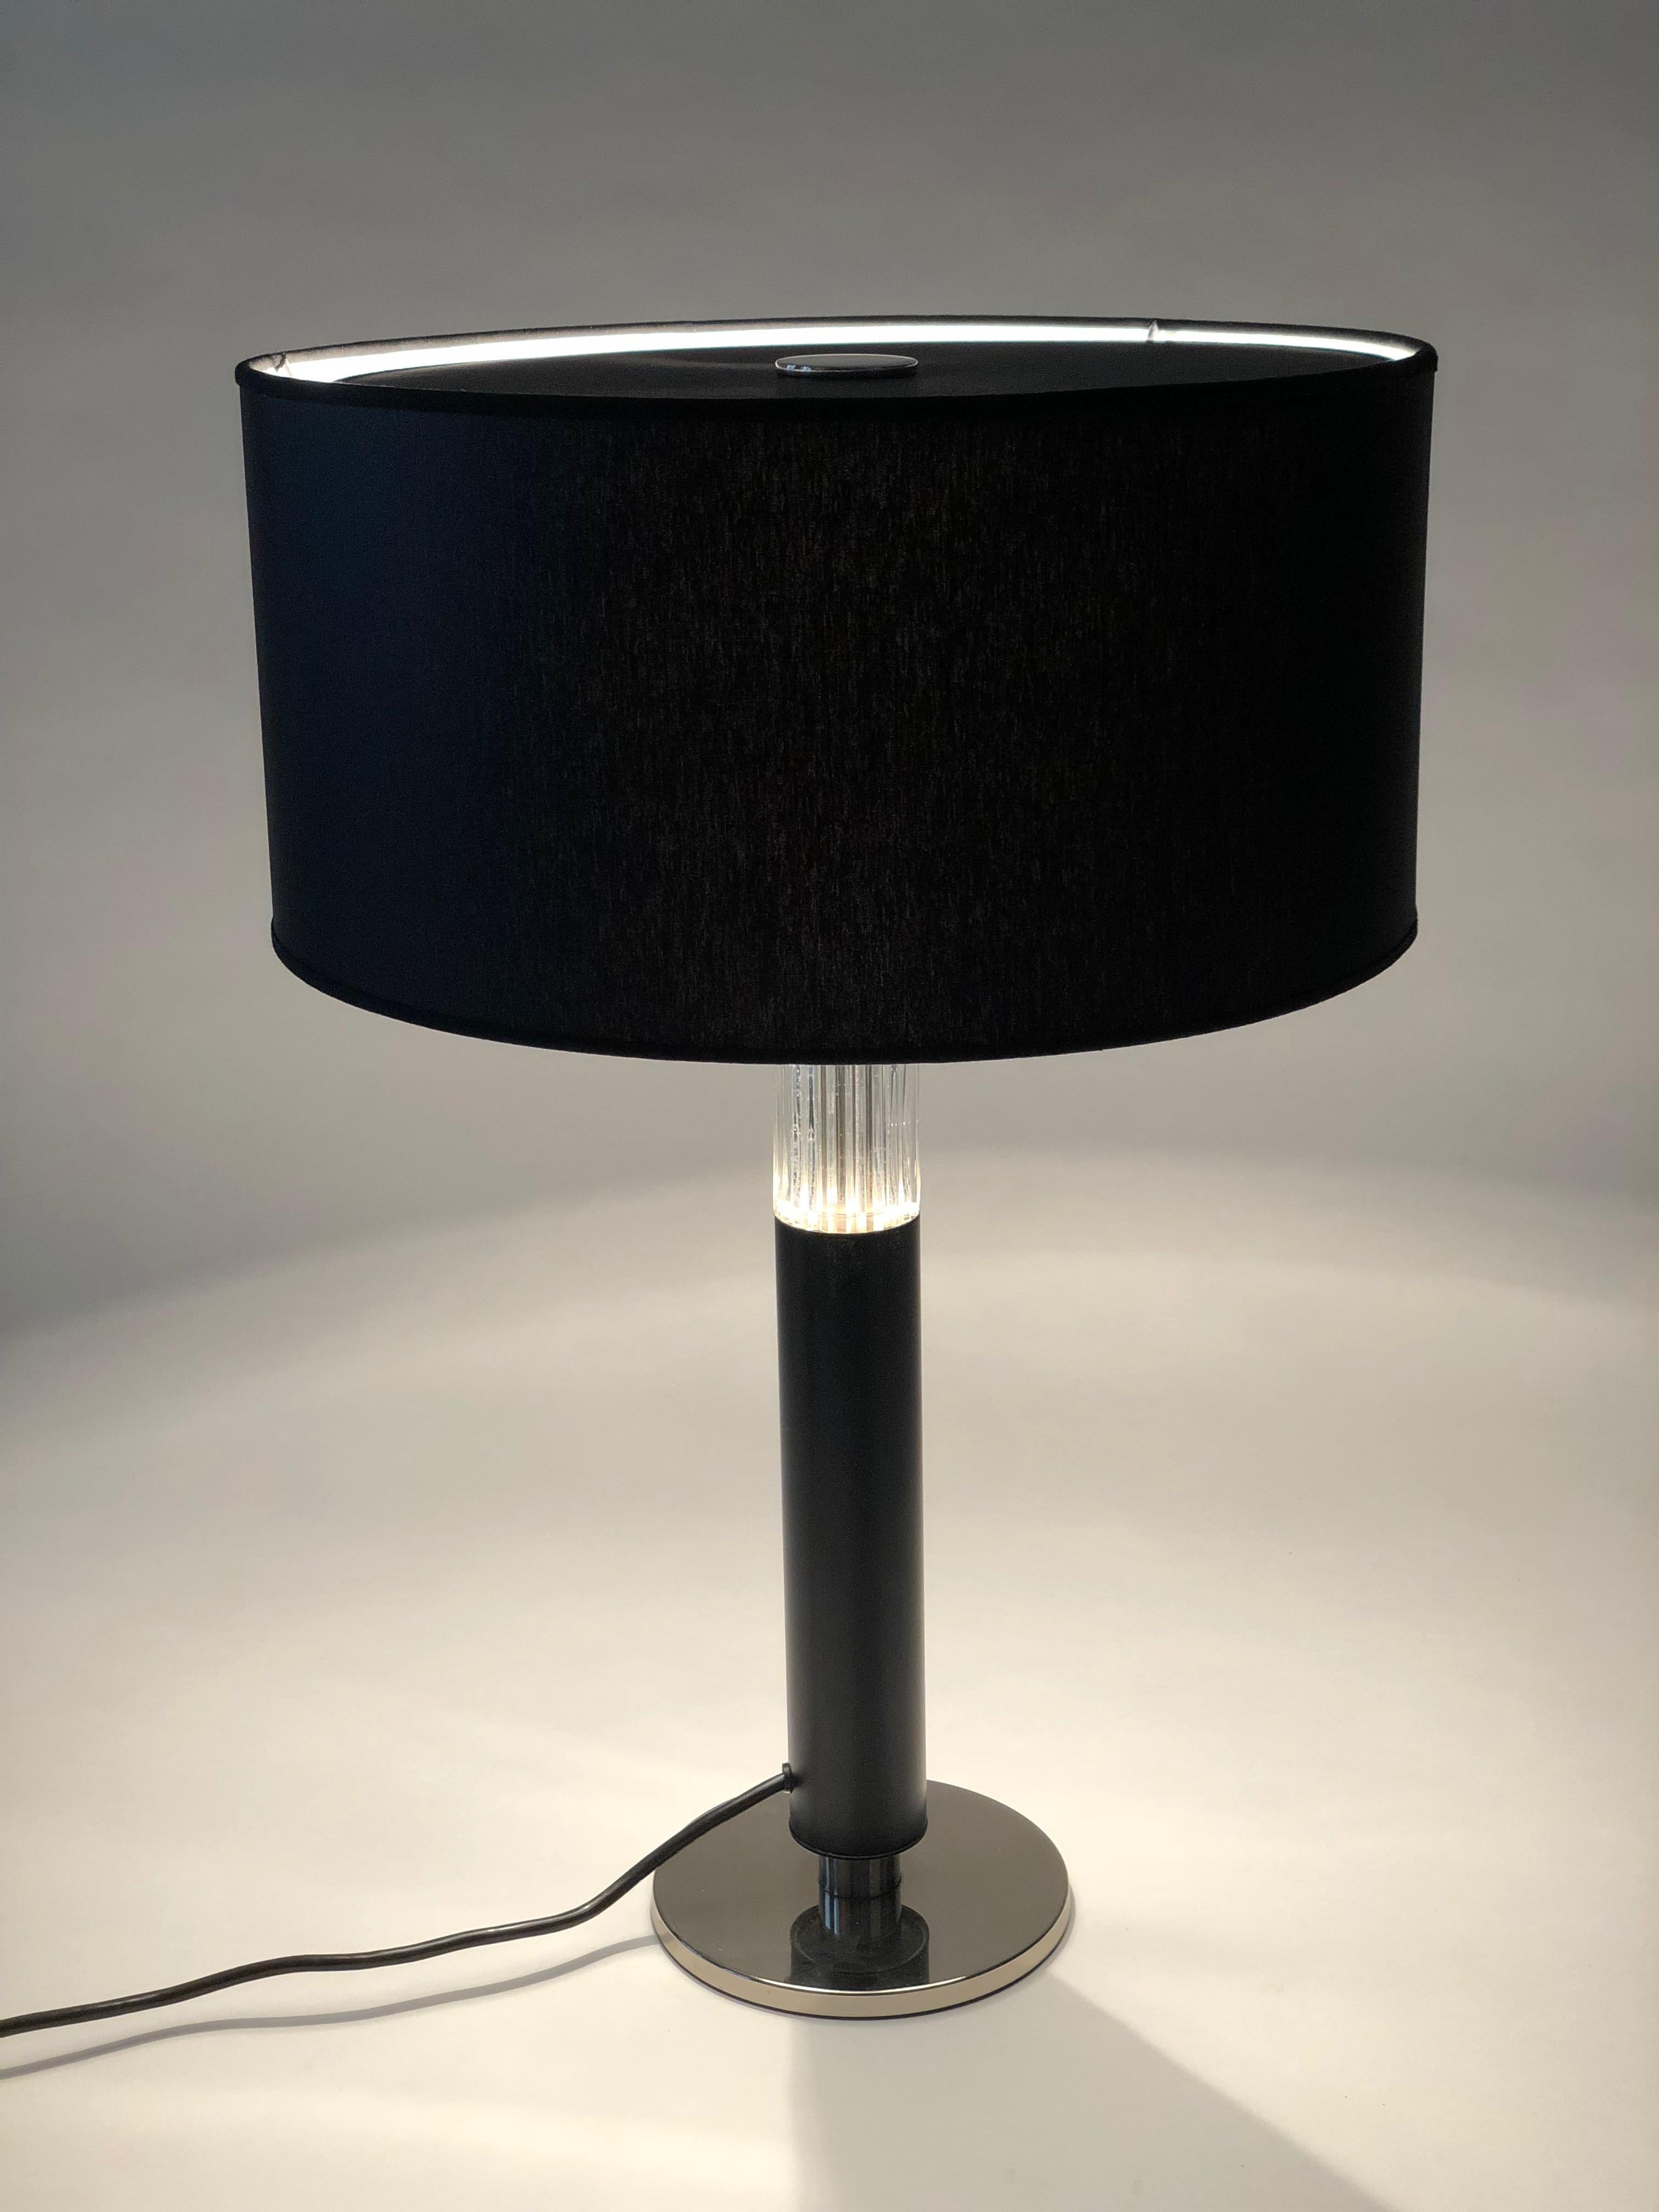 Masculine Black Table Lamp from J. T. Kalmar In Good Condition For Sale In Vienna, Austria